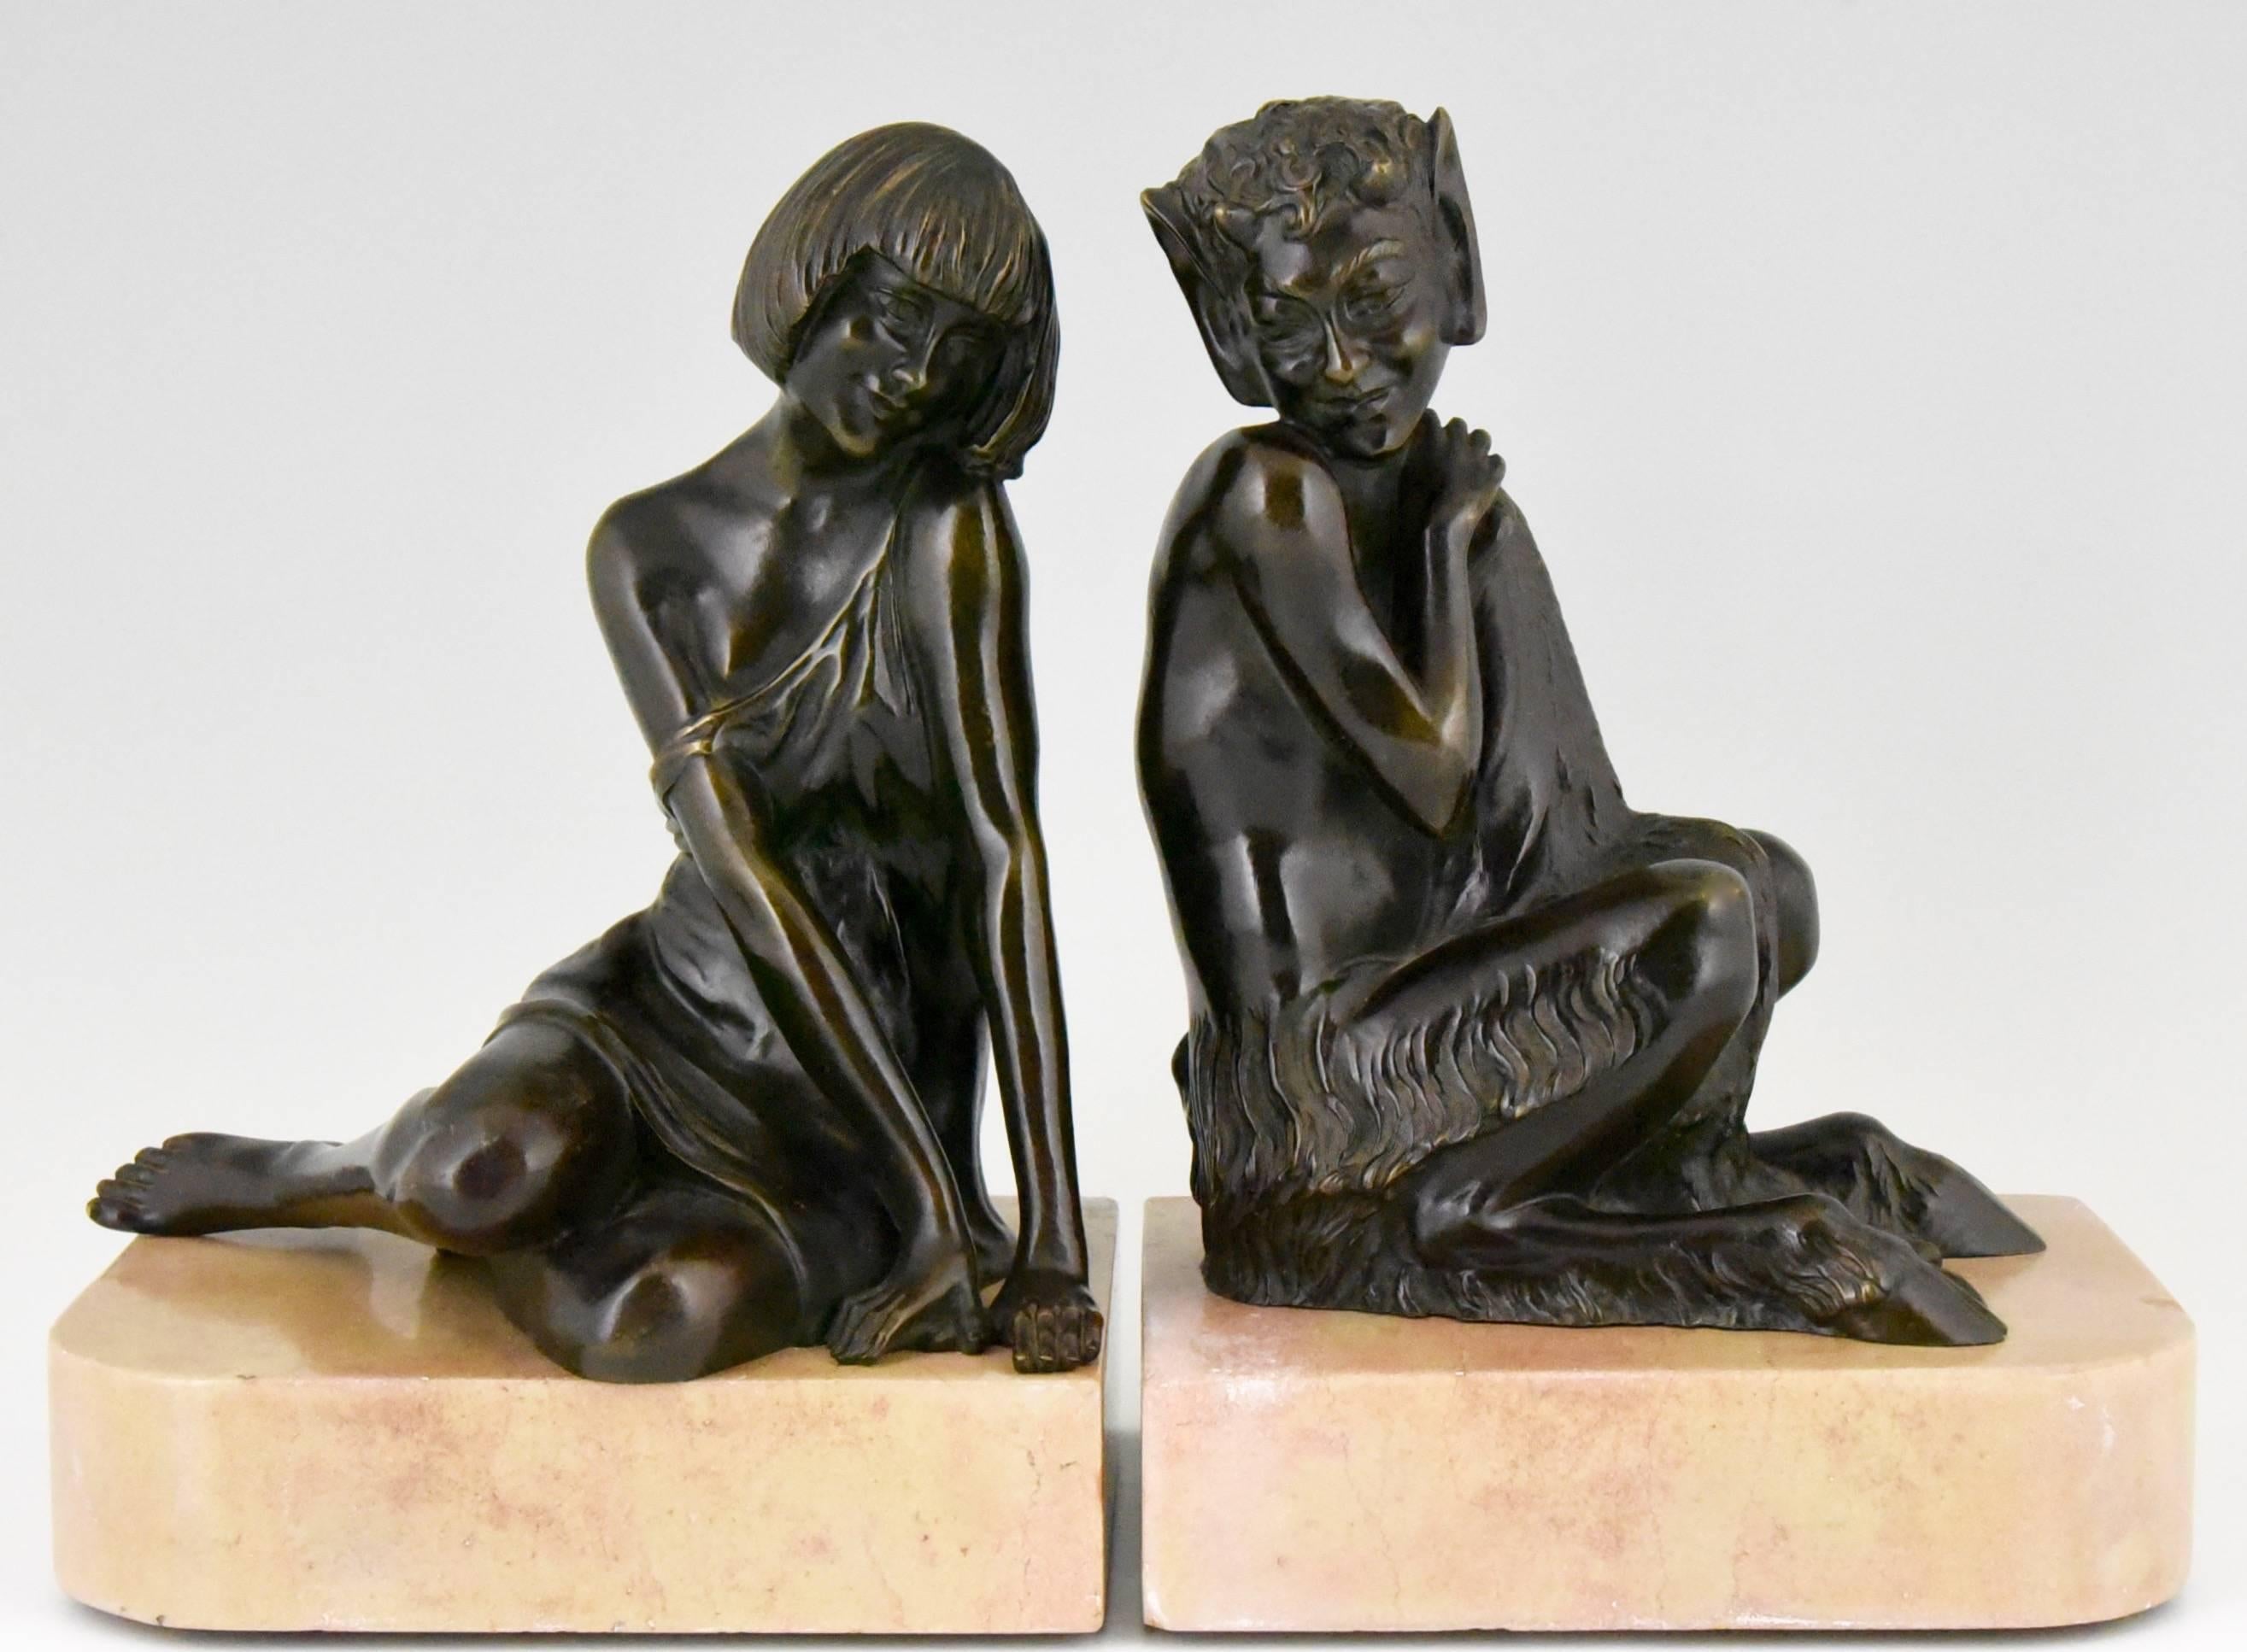 Title: ?Faun and nymph. 
?Art Deco bronze bookends with a sitting satyr and nymph. 
Artist/ maker: ?Le Faguays, Pierre 
Signature/ marks: ?Le Faguays.??
Style: Art Deco.
Condition: ?Very good condition.? 
Minor restorations to the rim of the